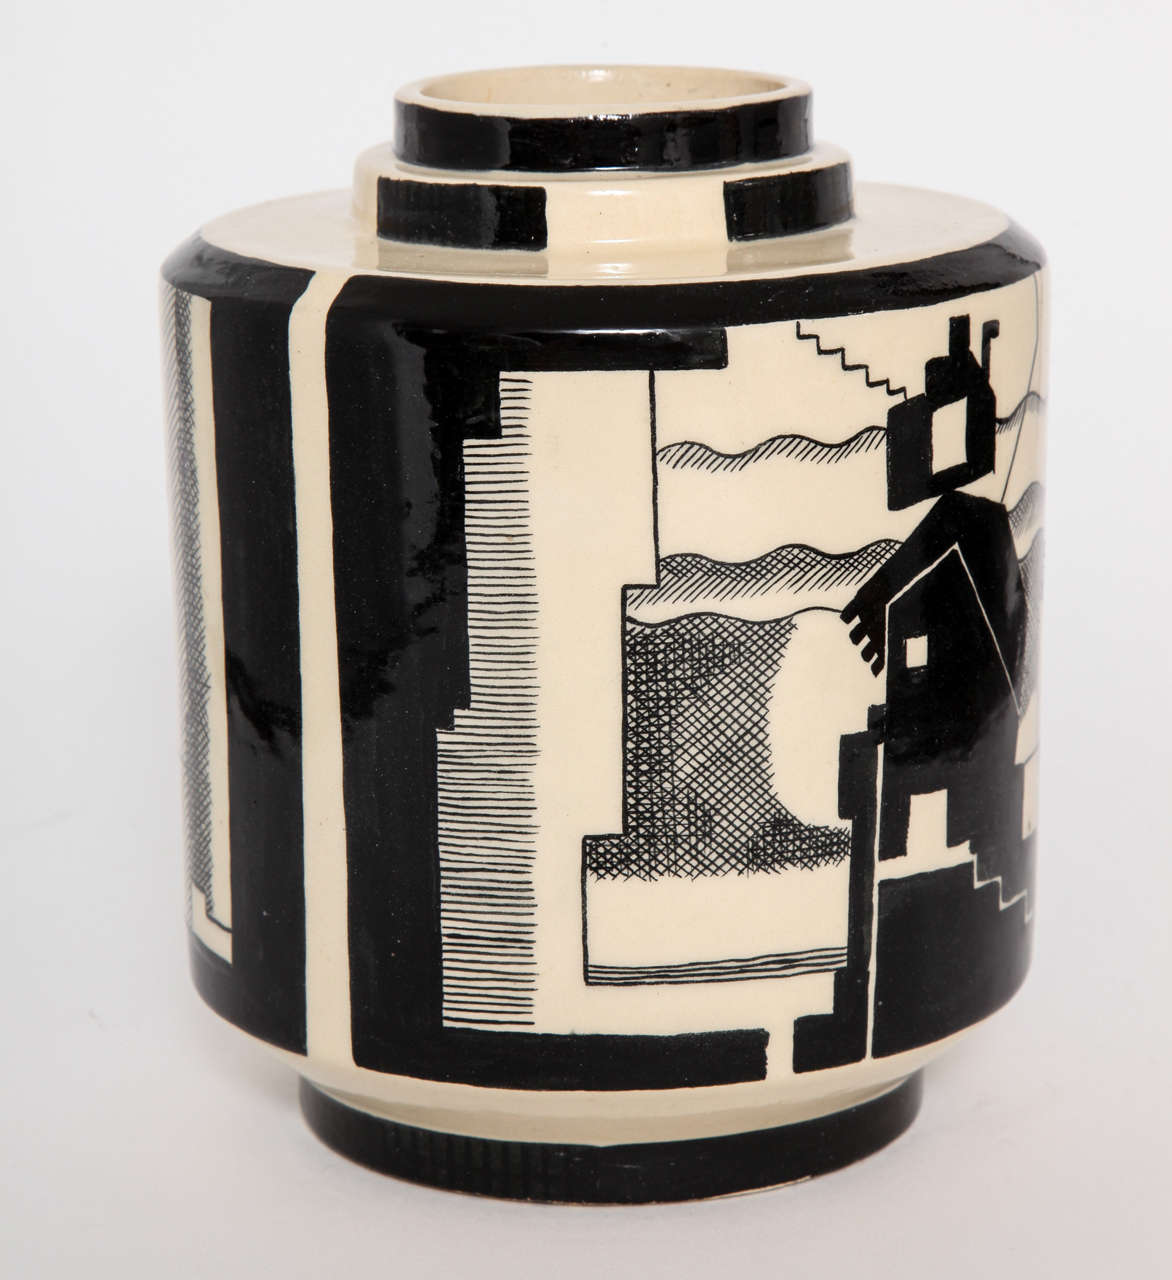 A French Art Deco ceramic vase designed and made by the ceramic artist Robert Lallemant in 1928. The black and white vase is decorated with a cubistic landscape. The underside has a 
 T Lallemant R France painted mark.